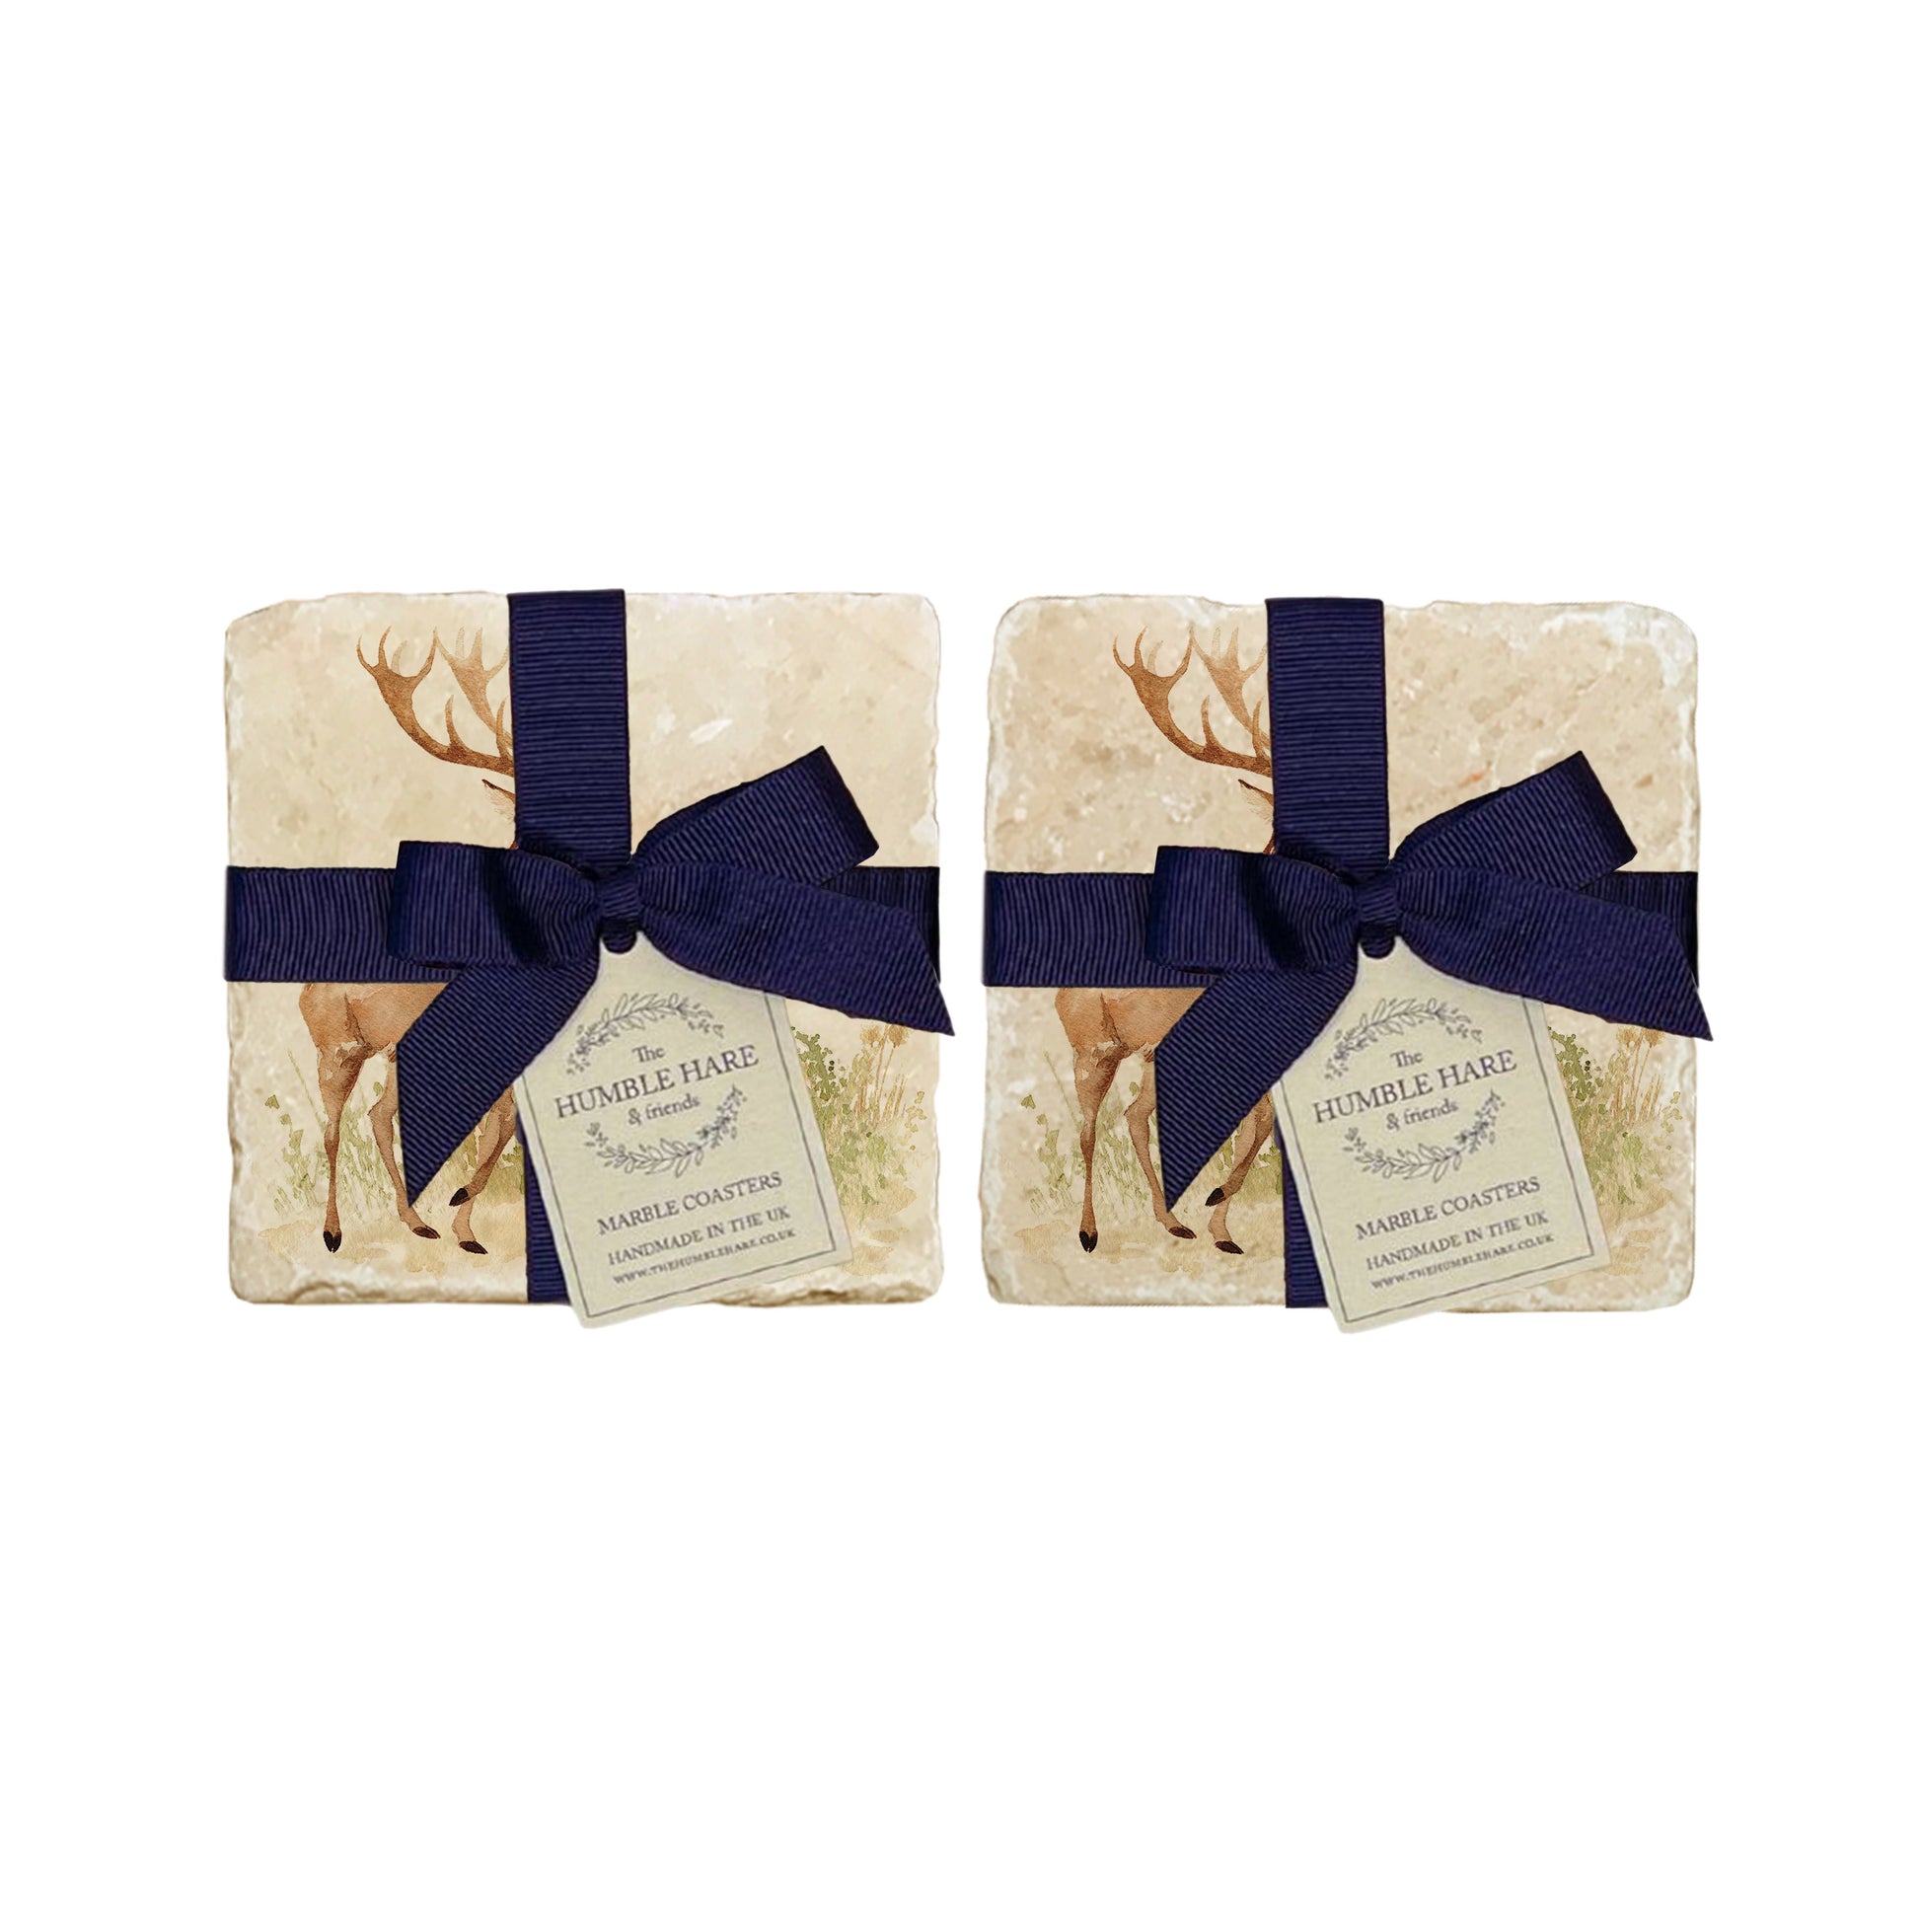 A set of 4 handmade marble coasters packaged in 2 pairs, with a luxurious blue bow and gift tag. The coasters feature a watercolour design of a red deer stag and hind.